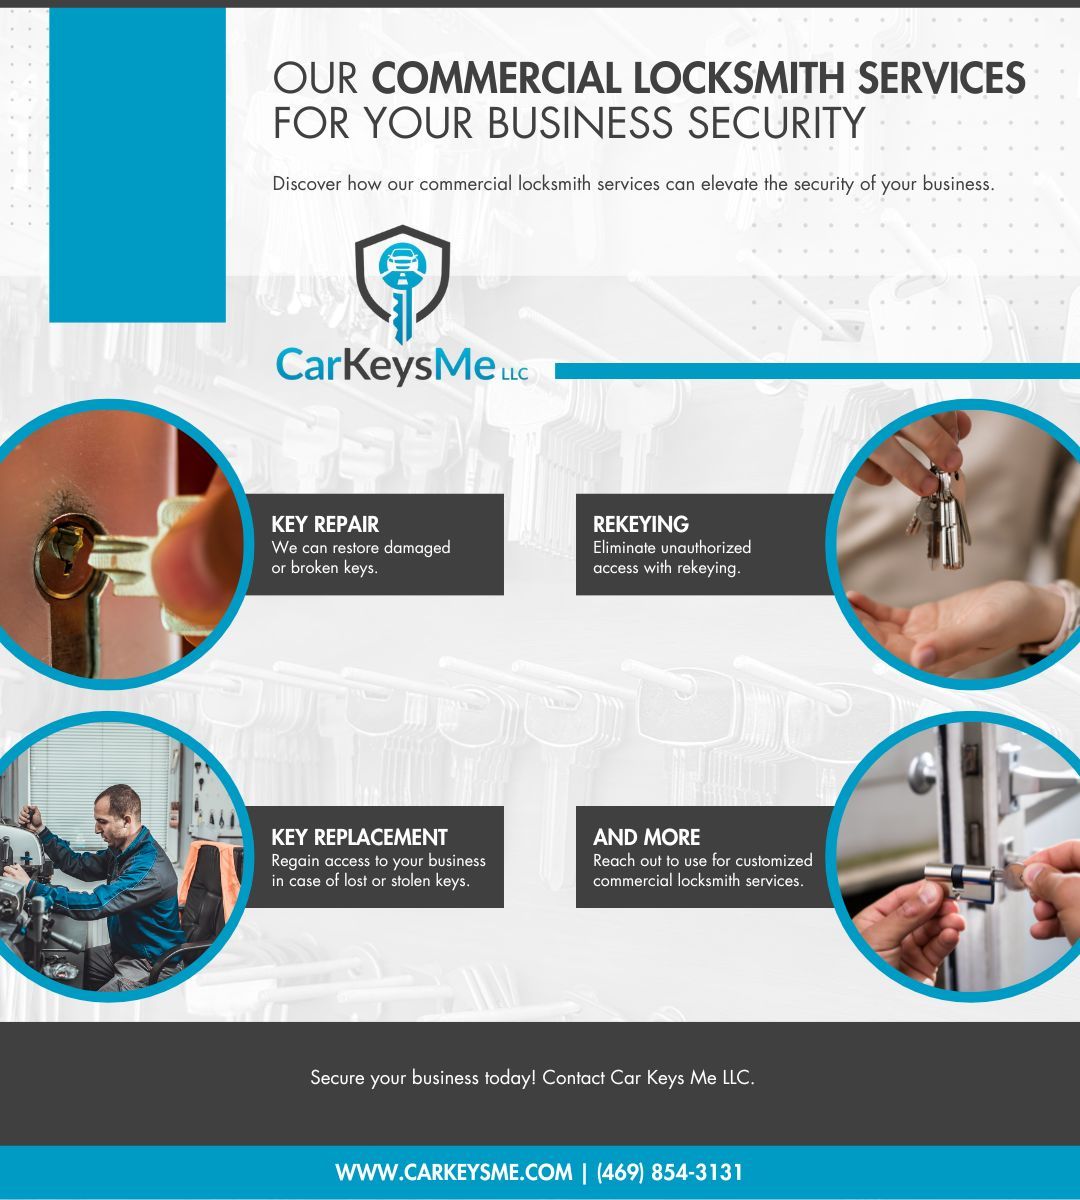 M38667 - Car Keys Me LLC - Commercial Locksmith Services for Your Business Security.jpg